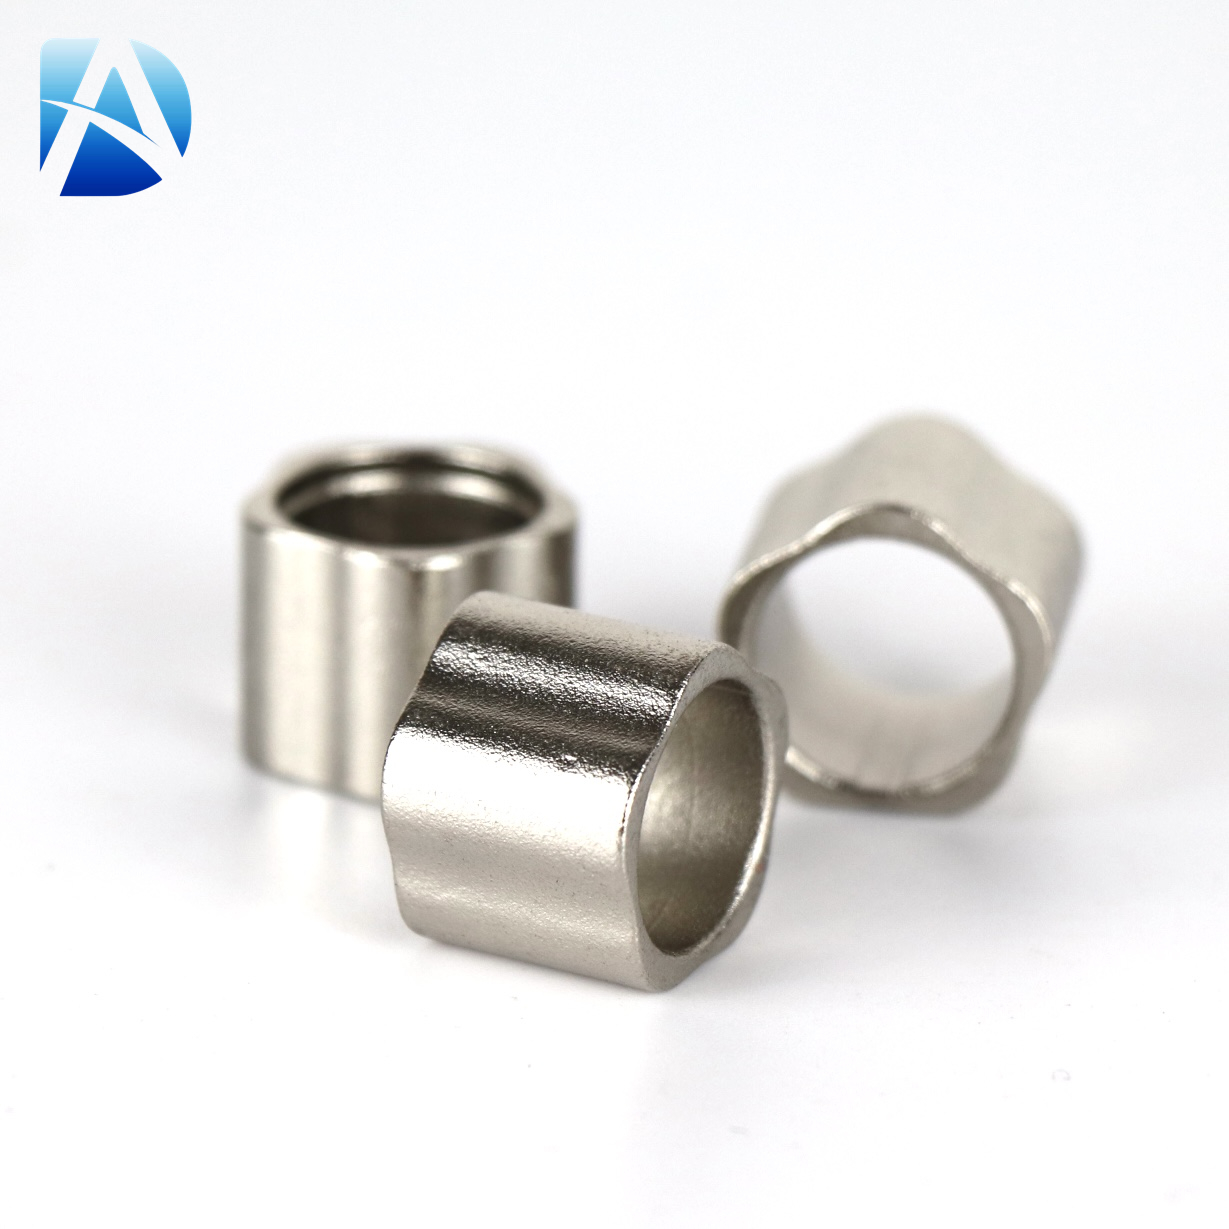 Stainless Steel Handle Knobs, Thumb Nuts, Knob Cylinder, And Hex Nut